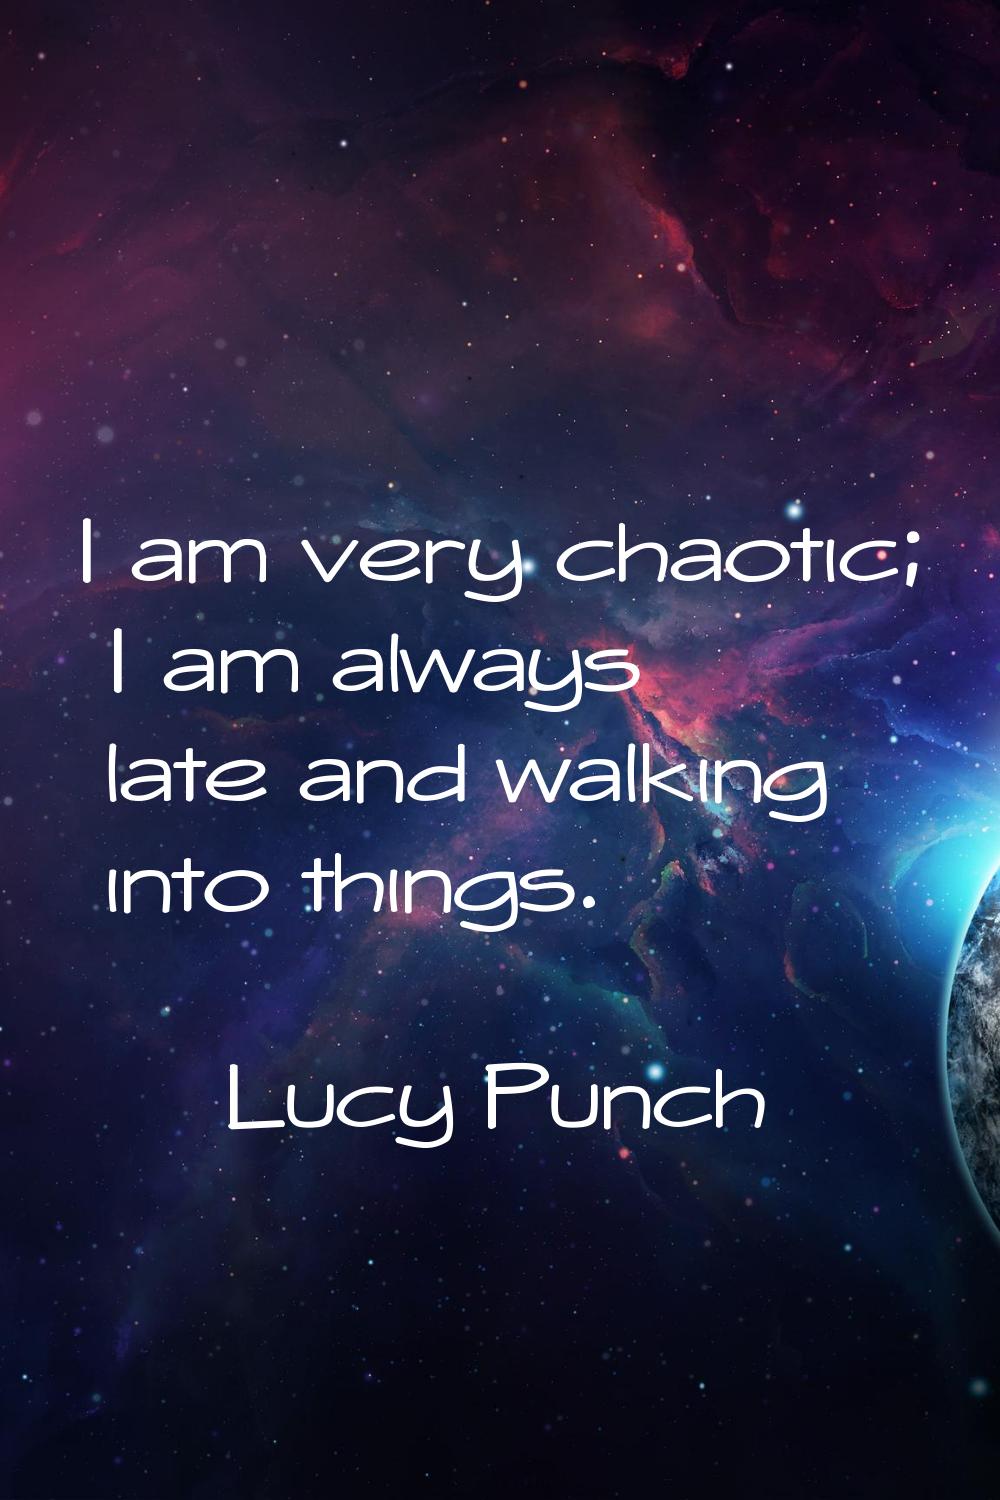 I am very chaotic; I am always late and walking into things.